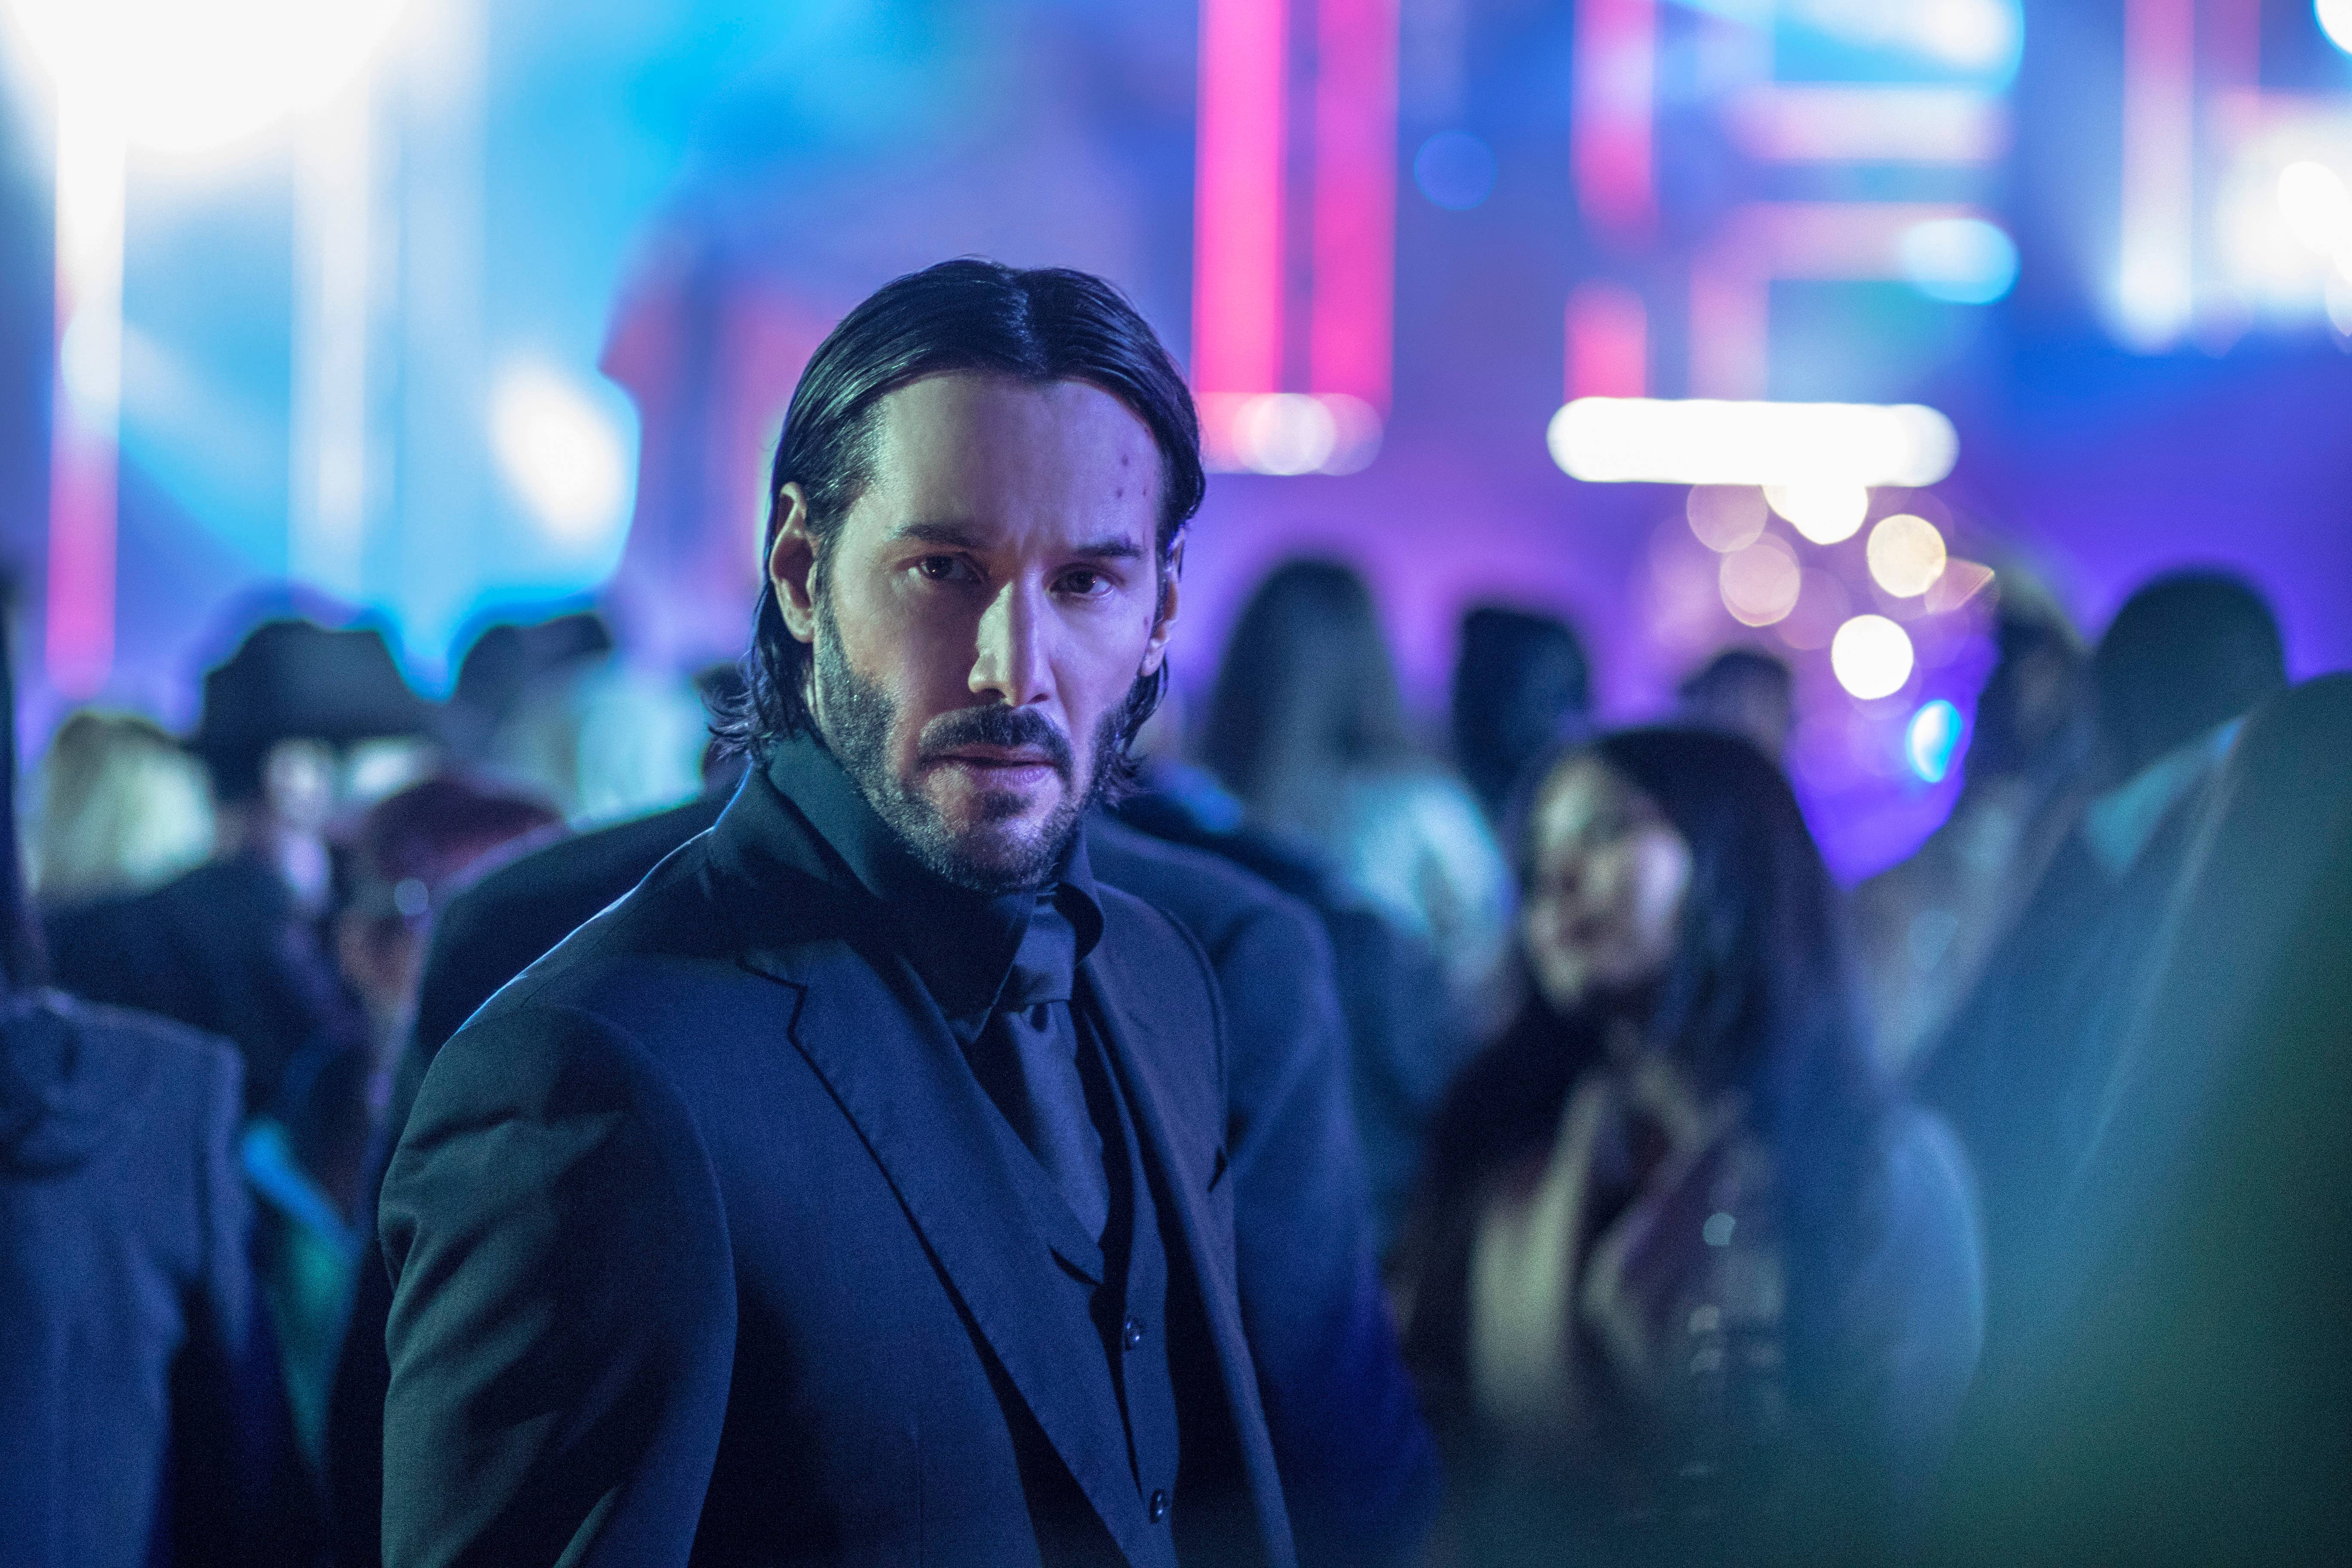 John Wick Sure Has a Lot of Friends for a Lone Assassin - The New York Times